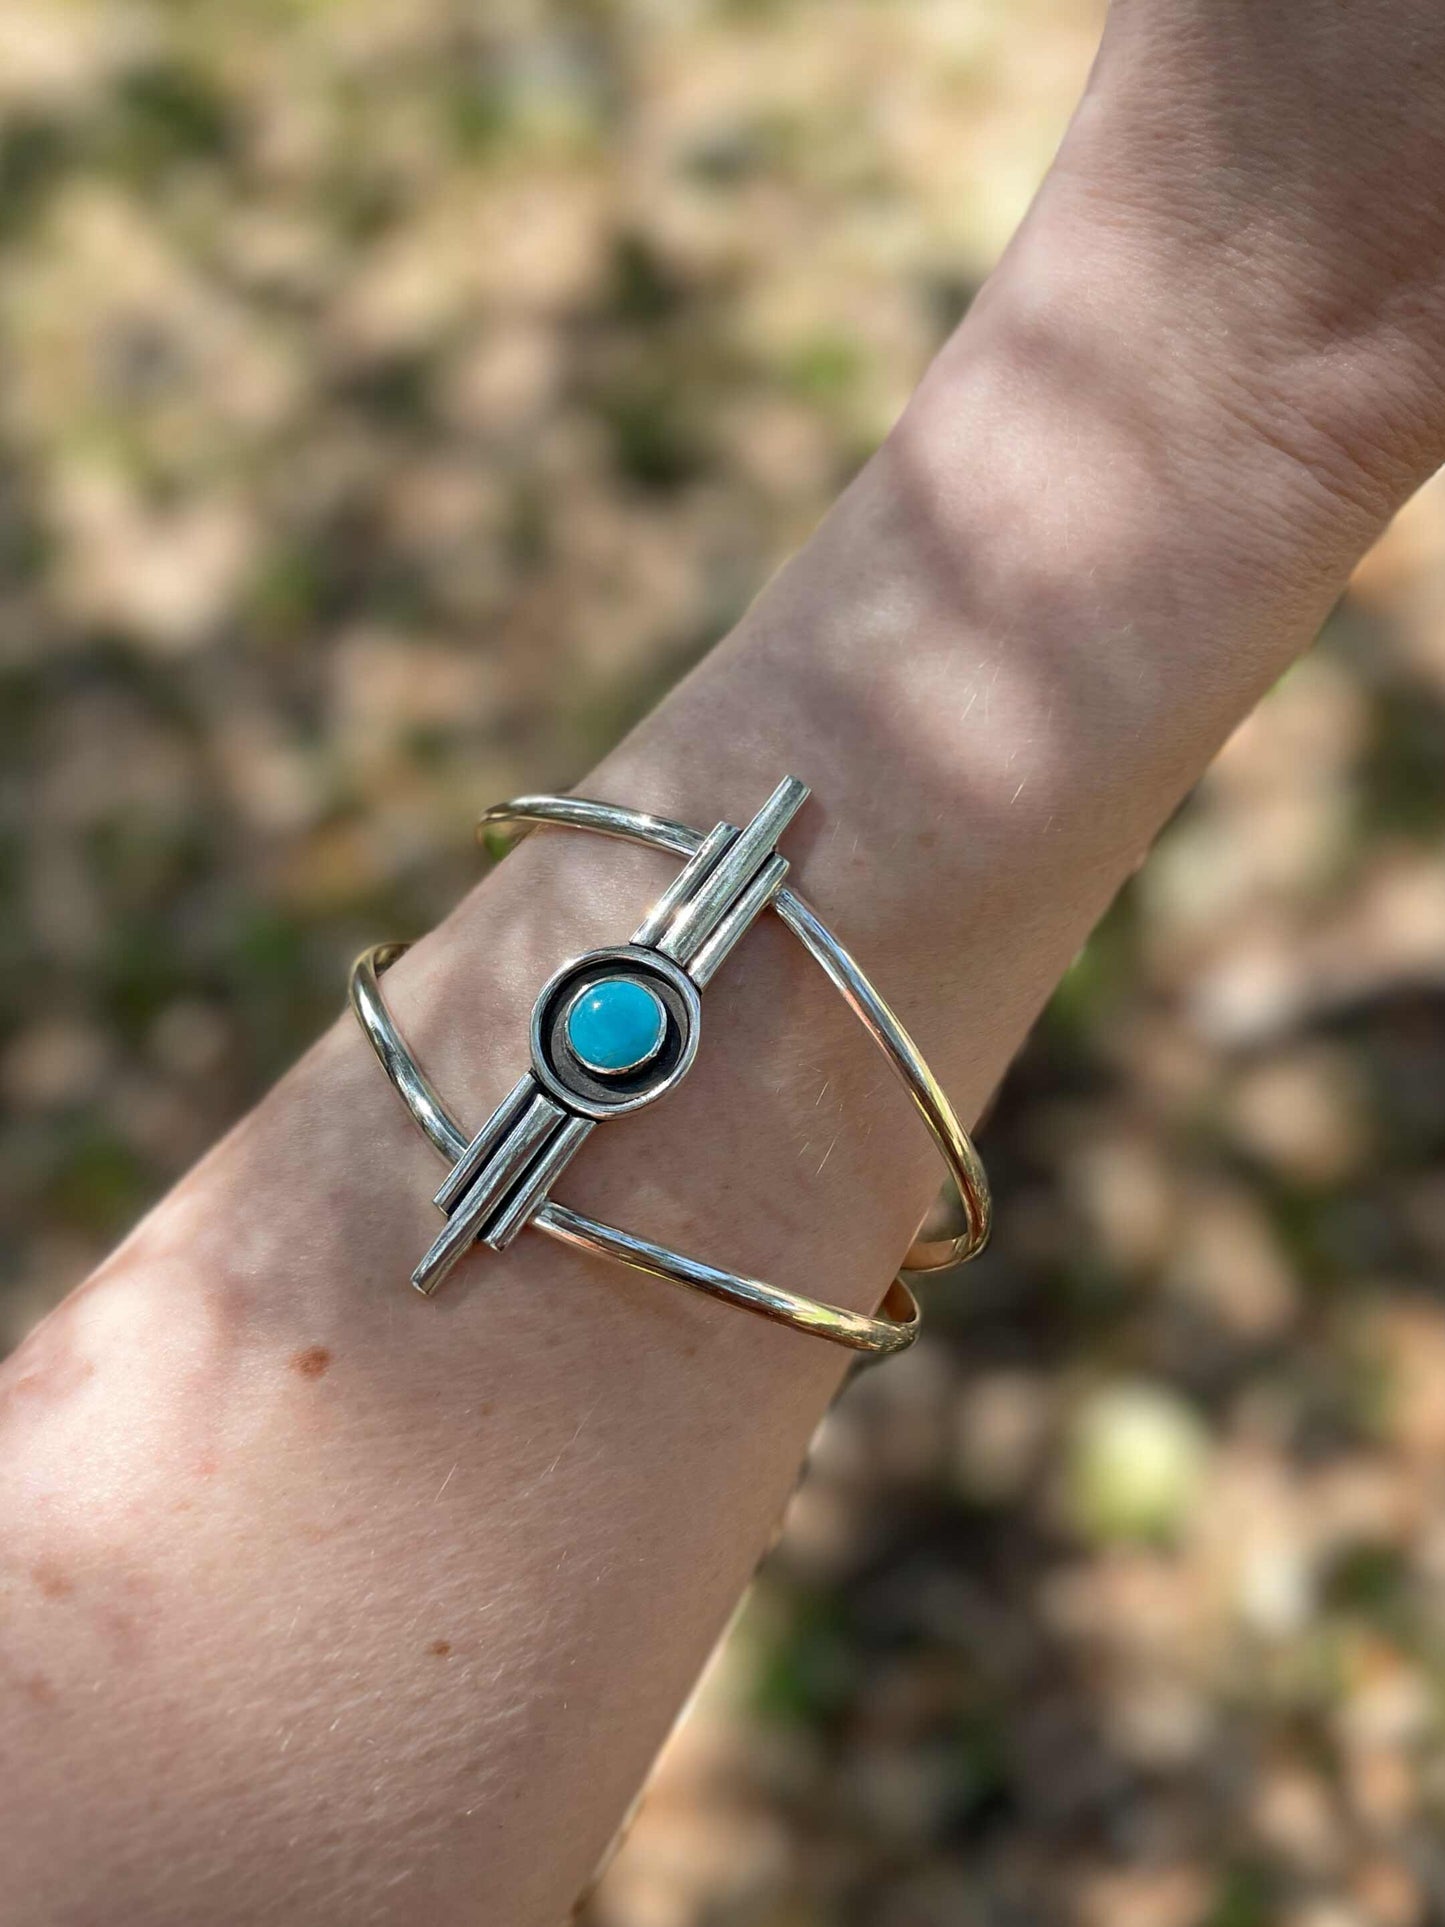 Turquoise Art Deco inspired sterling silver cuff bracelet worn on wrist outdoors in natural light.